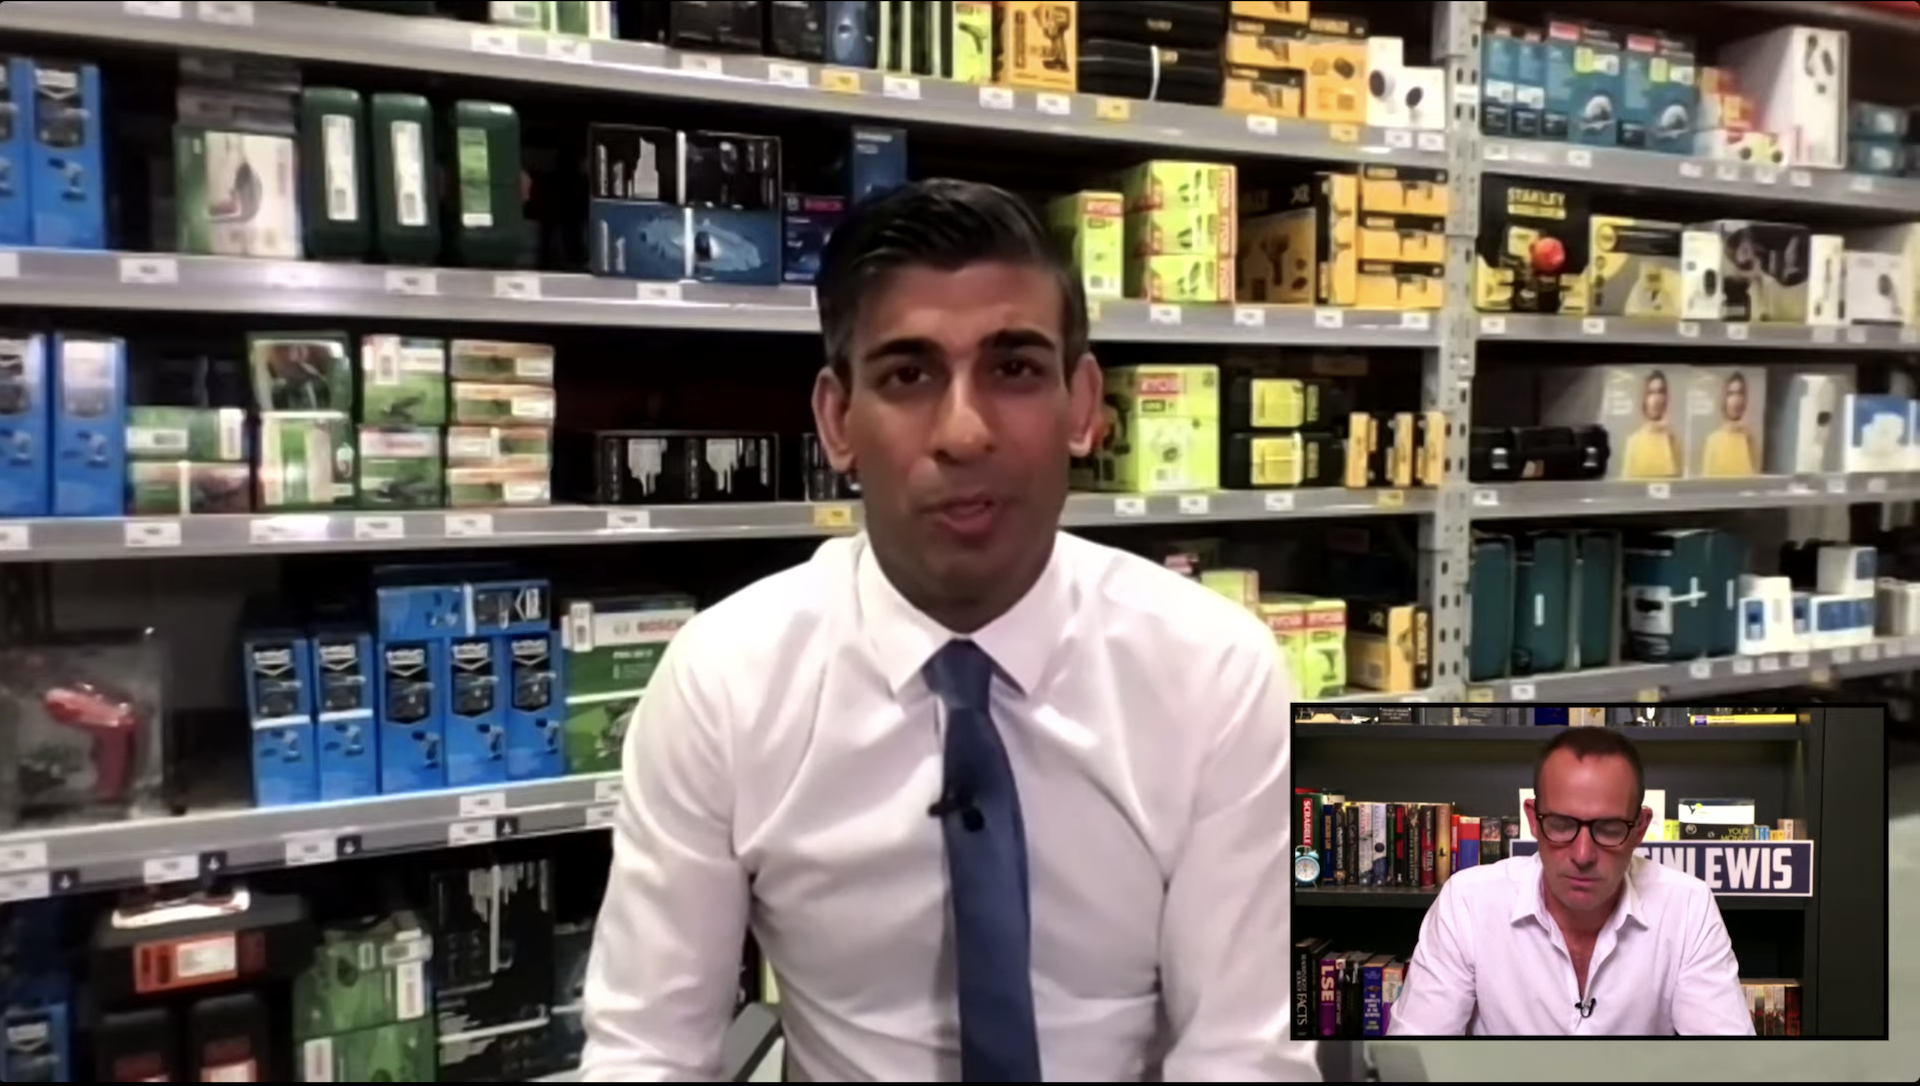 A screenshot from a livestream video shows Rishi Sunak sitting in a warehouse with Martin Lewis in an onset picture